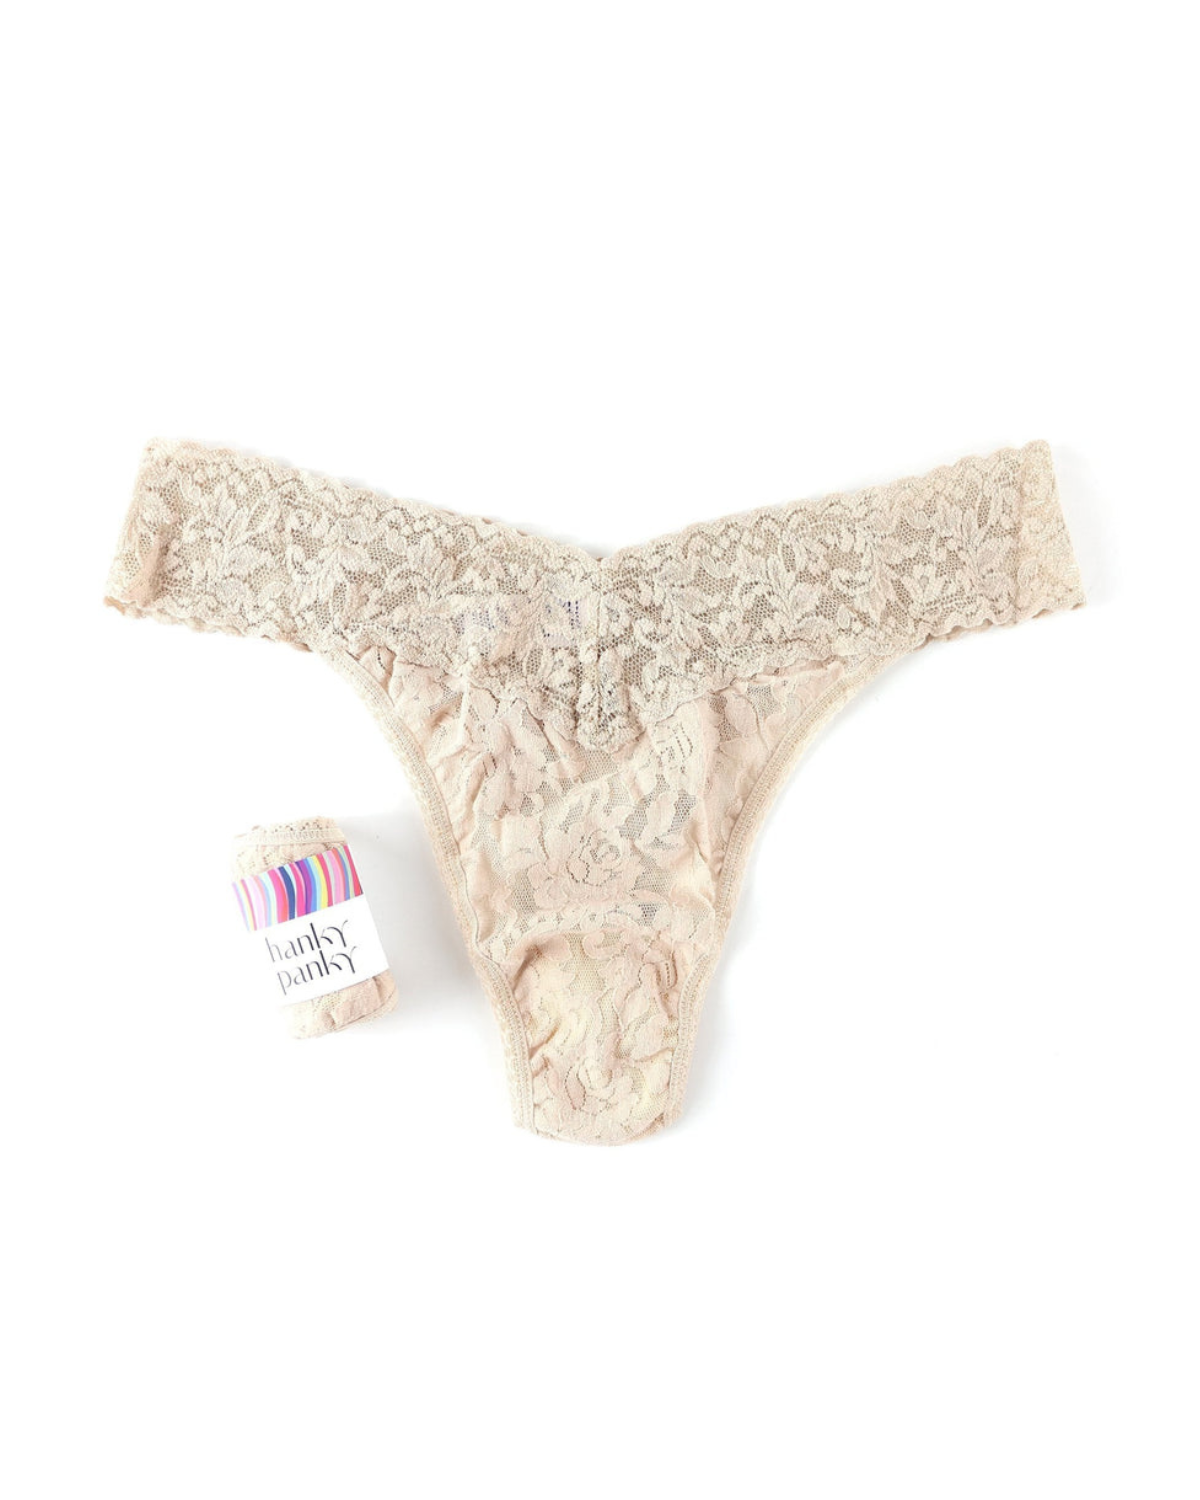 Flat lay of a beige thong